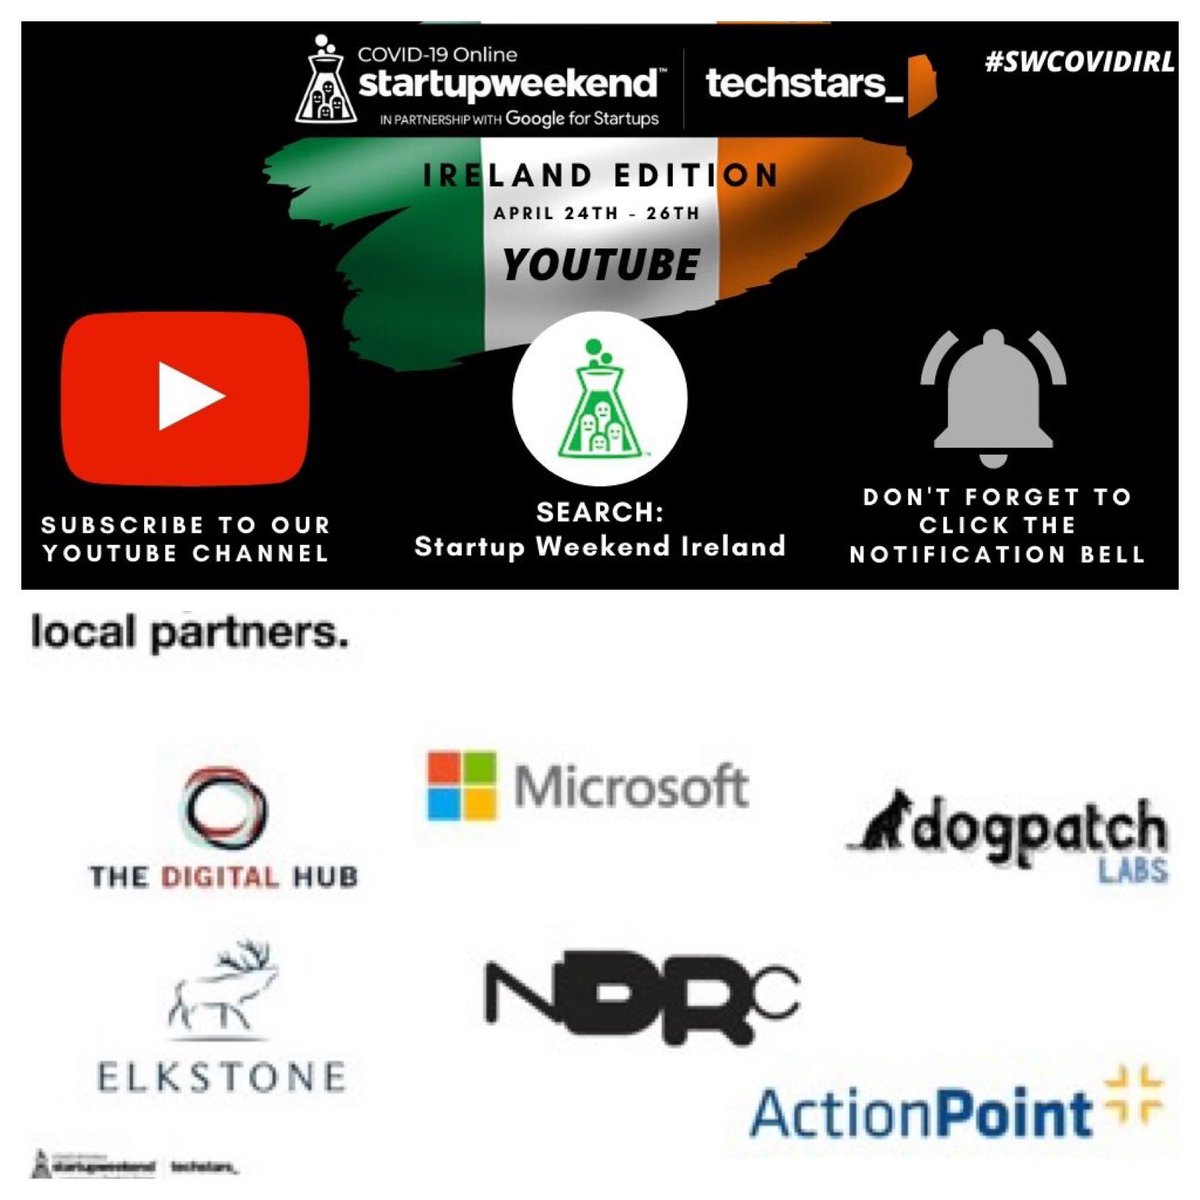 Check out tonight’s final pitches and support the amazing teams that came together online over 54 hours for @SWIreland_ #COVID19 edition here: bit.ly/2VXYotH